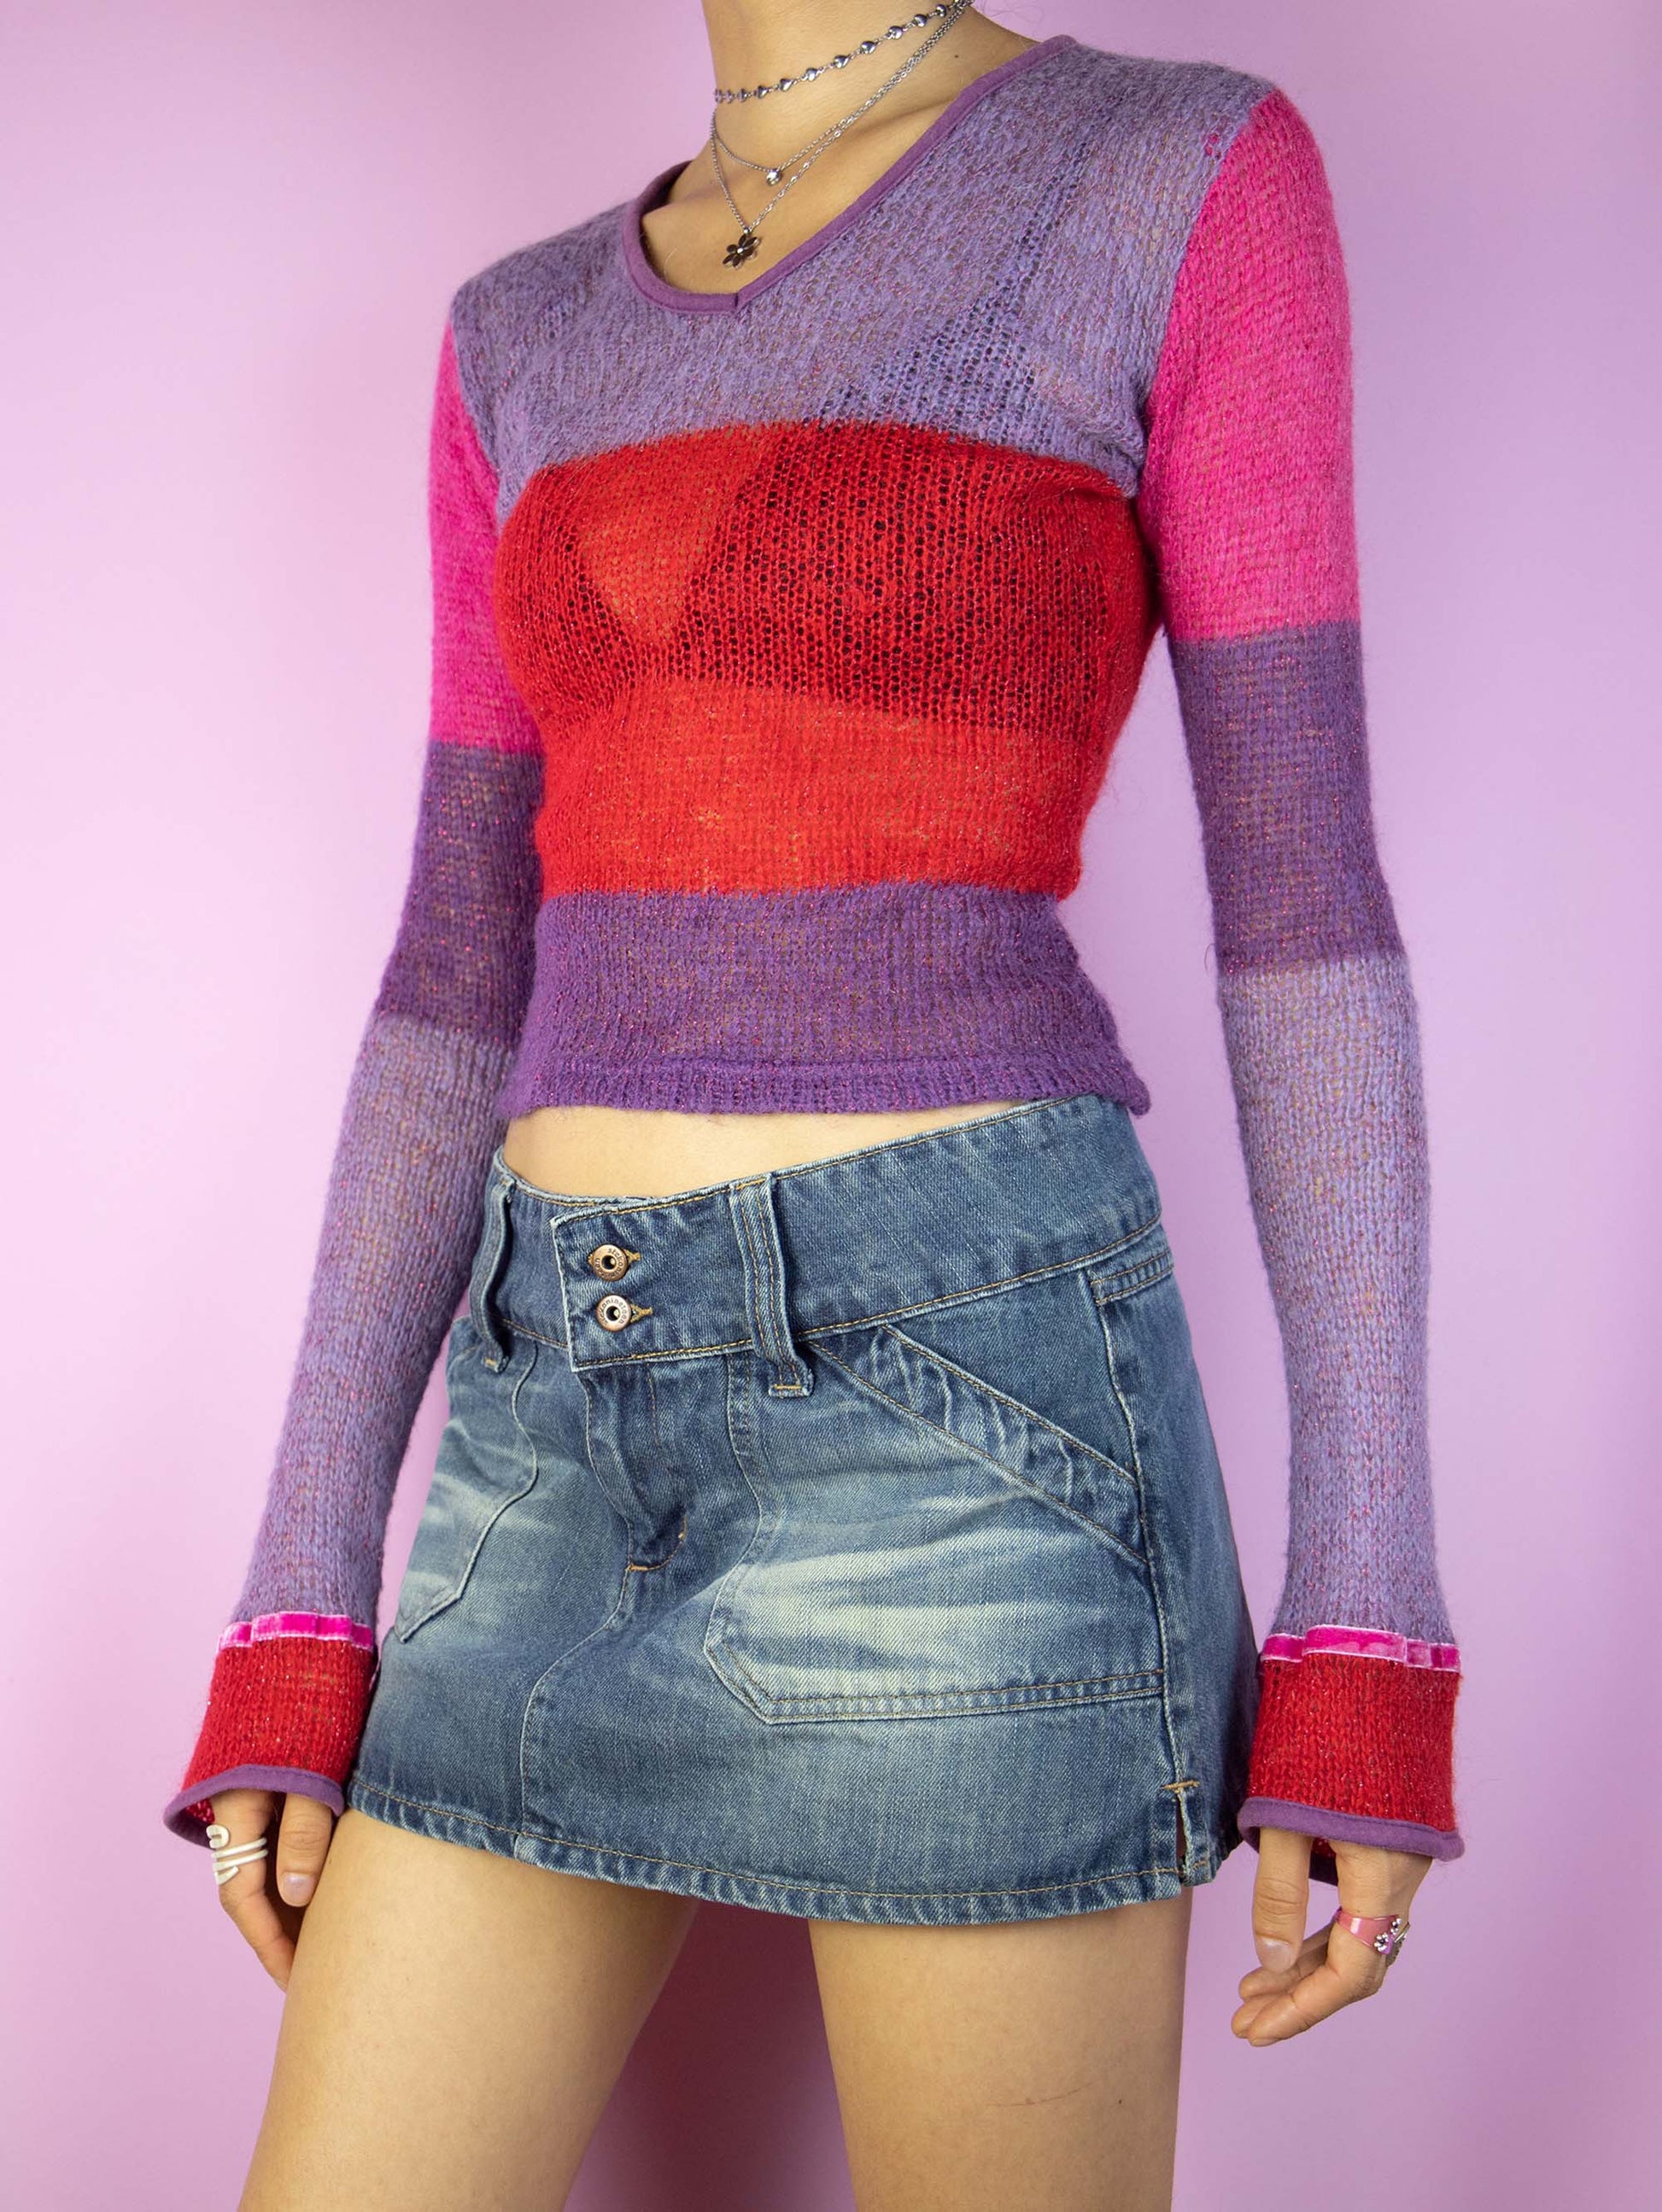 The Y2K Denim Low Rise Mini Skirt is a vintage 2000s cyber grunge low-waisted jean mini skirt with pockets.